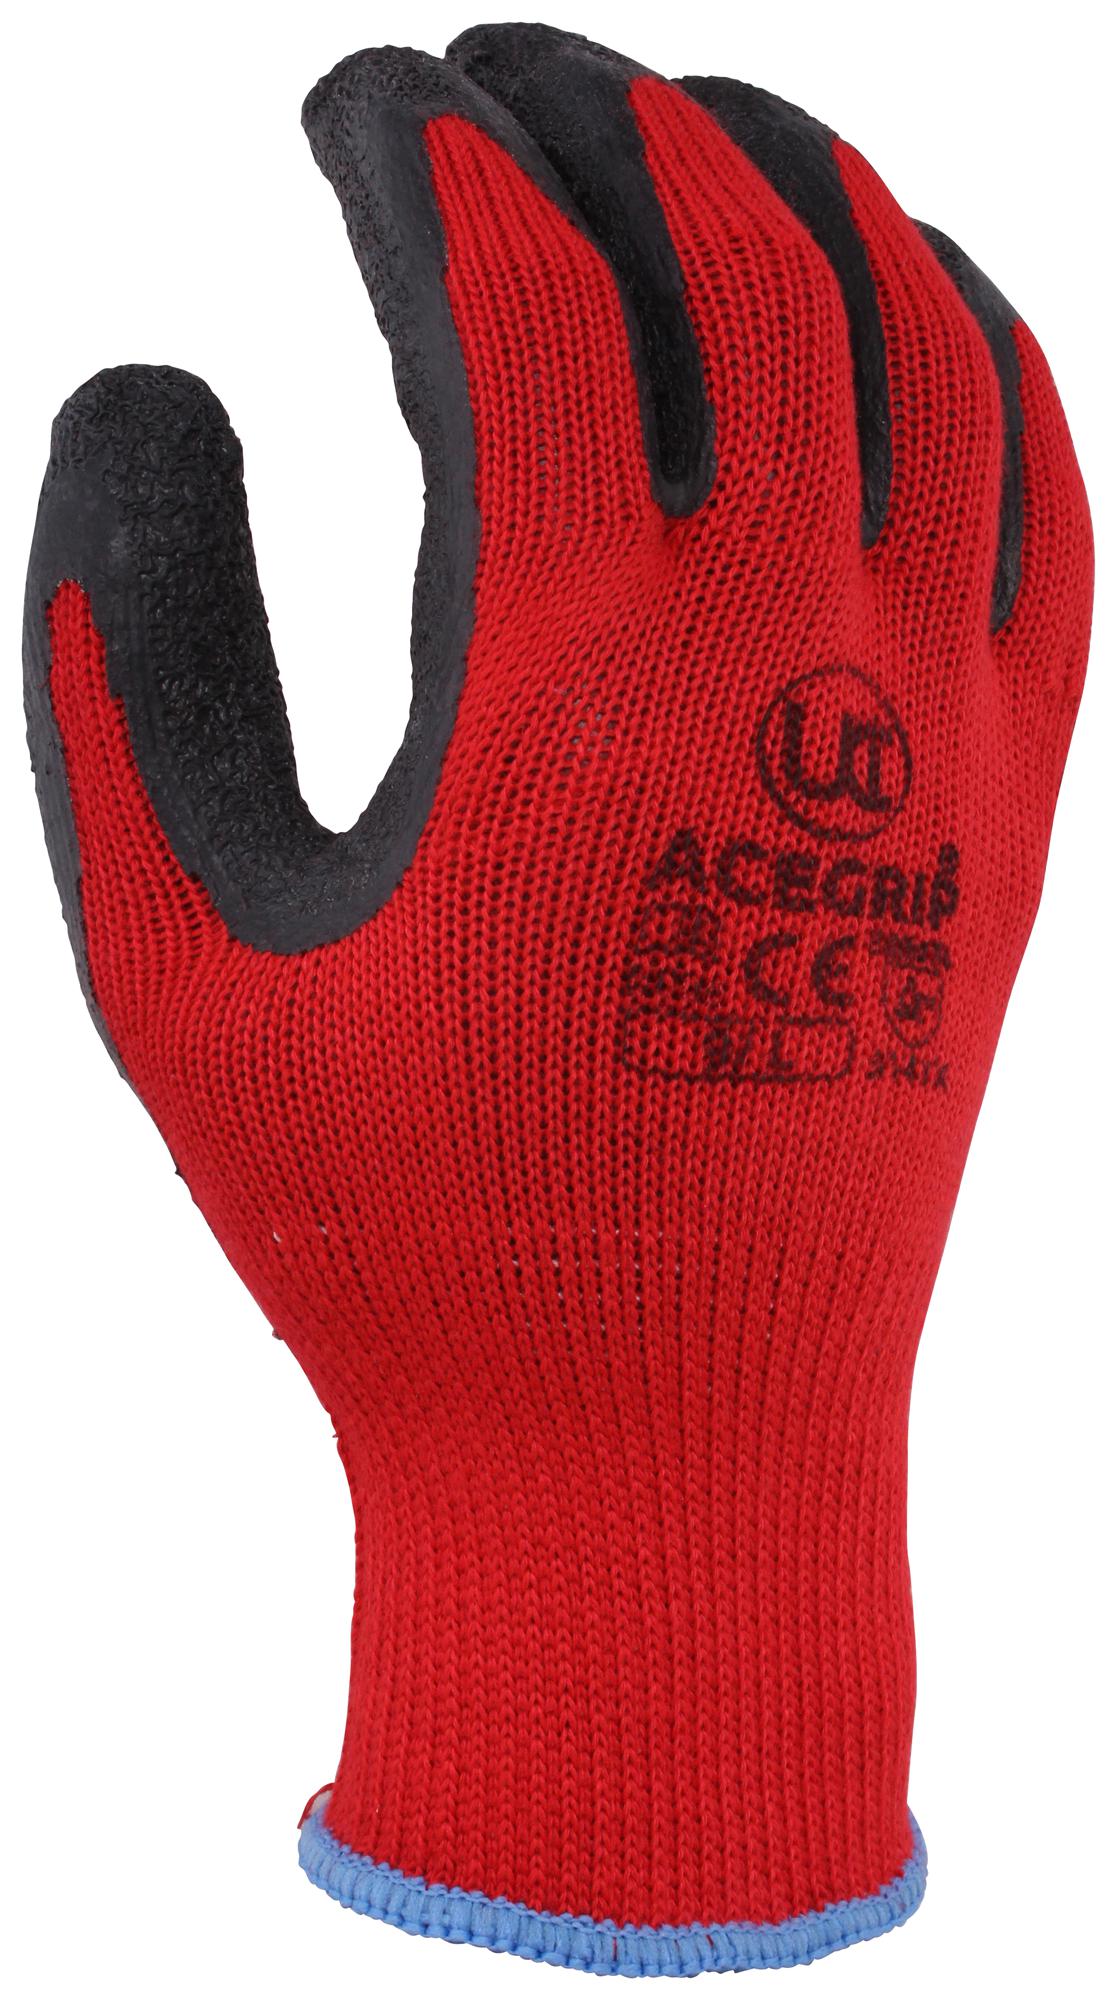 Uci G/acegrip-Rp/red/08 Gloves, Polycotton Liner, Red, M